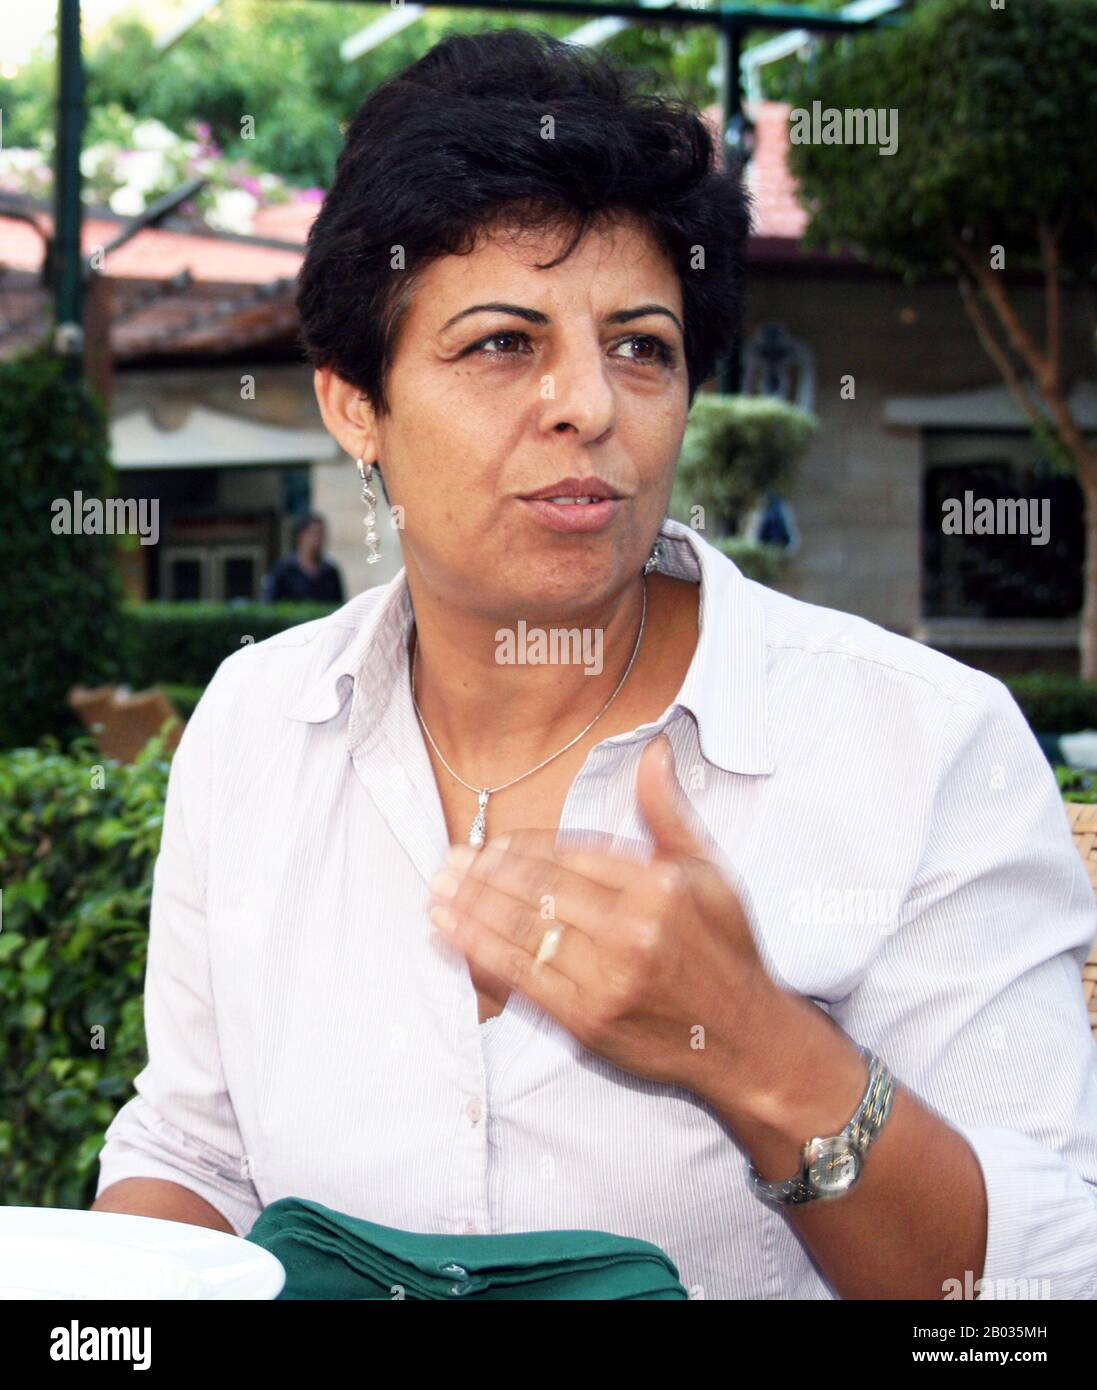 From 1996 to 2013, Naila Ayesh served as the general director of the Gaza-based Women’s Affairs Center (WAC), a knowledge-based non-governmental organization devoted to advancing women’s leadership, empowerment, and participation in political and public life, as well as their role as agents for change in their communities. Stock Photo